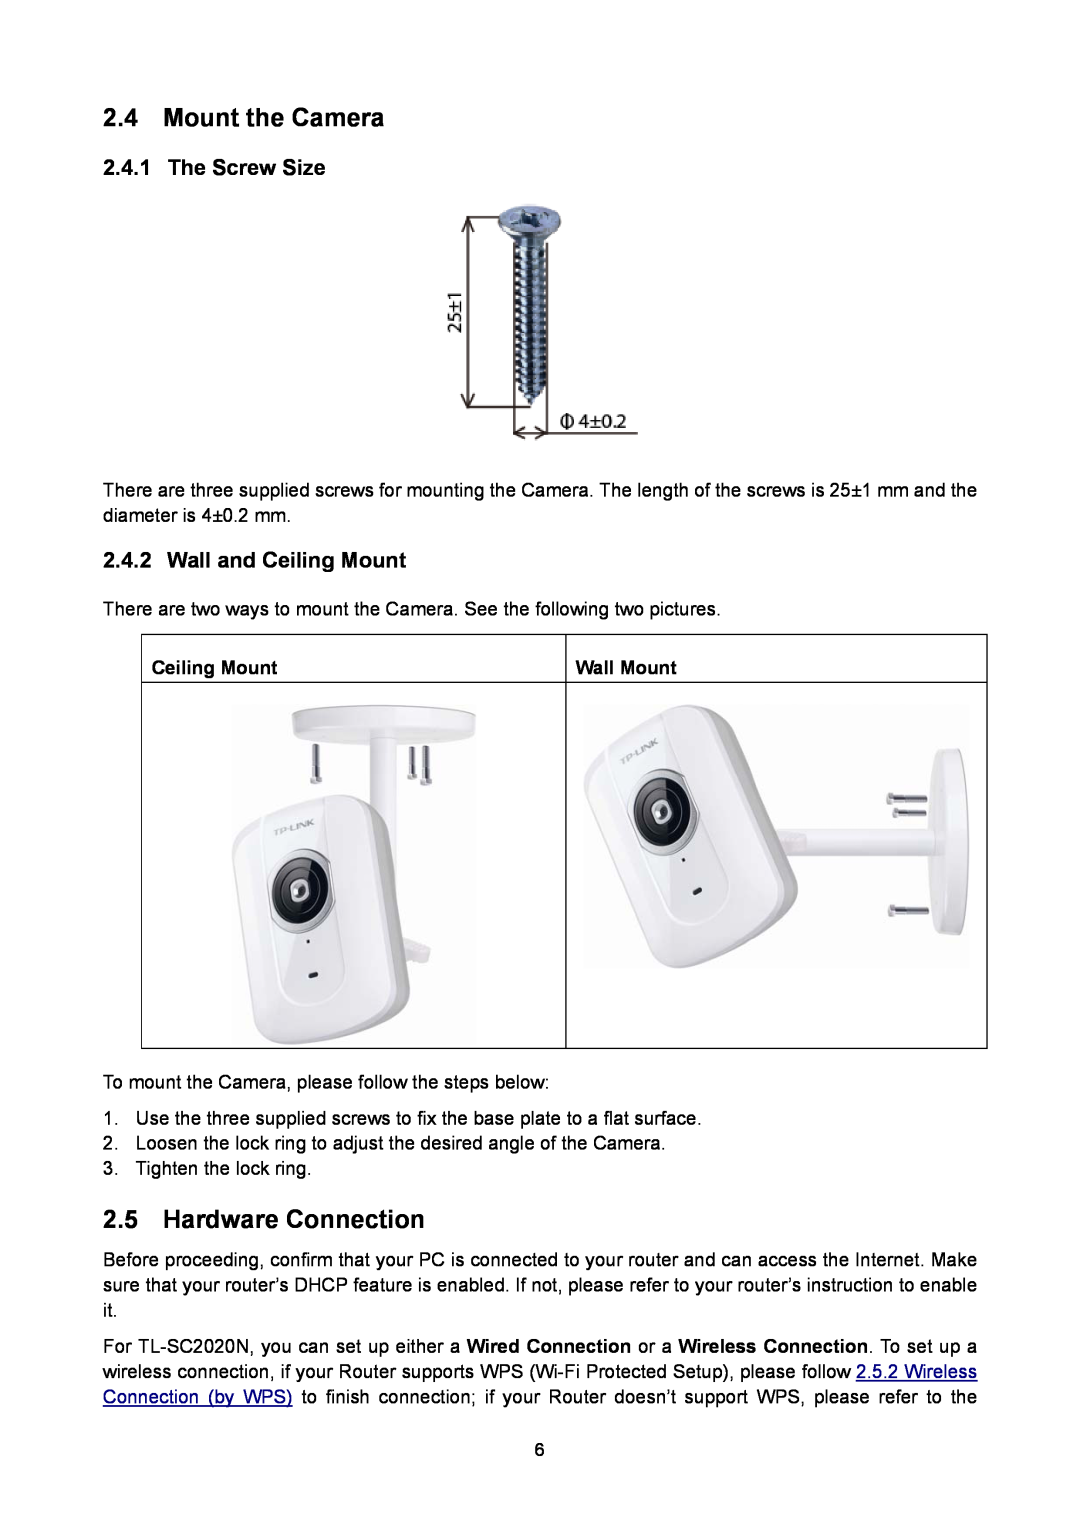 TP-Link TL-SC2020N manual Mount the Camera, Hardware Connection, The Screw Size, Wall and Ceiling Mount 